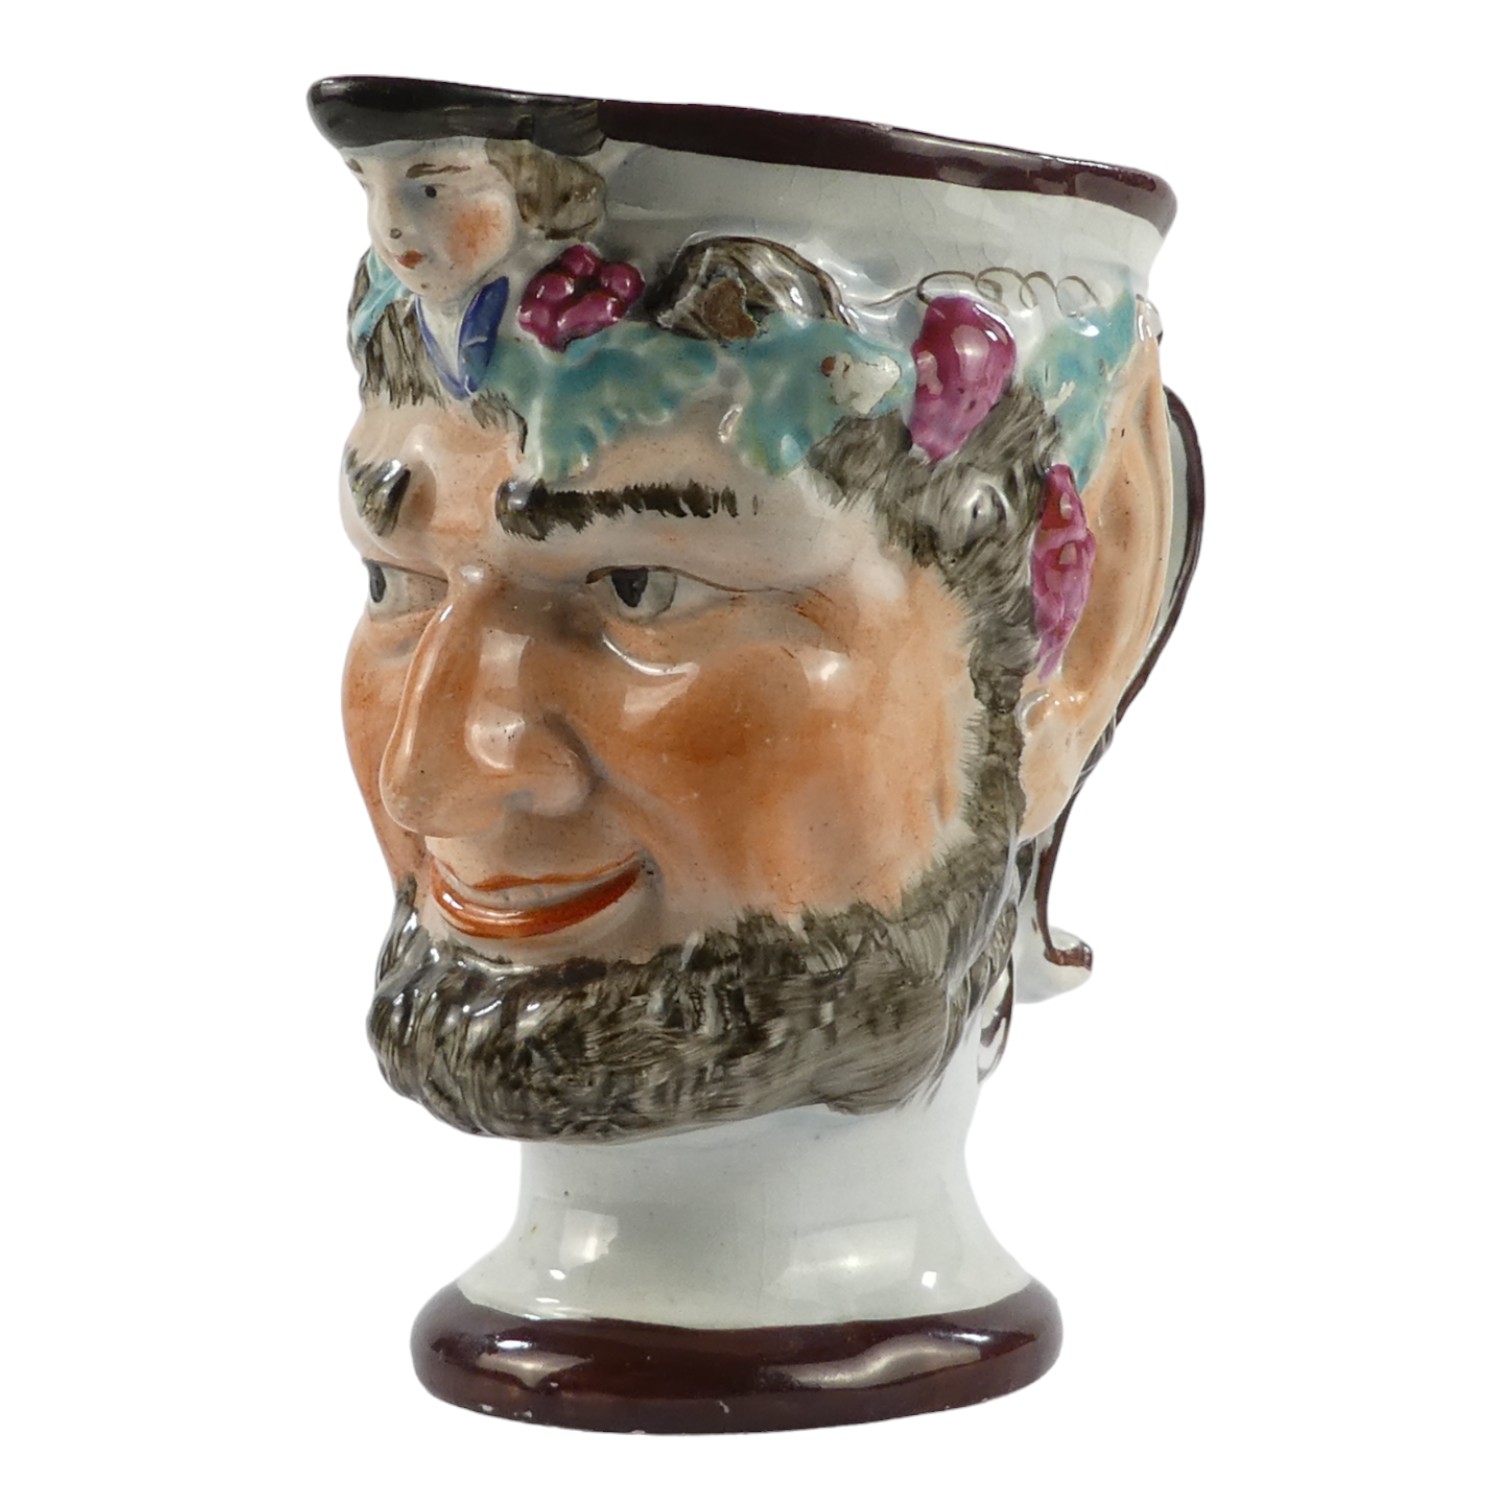 An early 19th century pearlware jug - modelled in the form of Bacchus, height 11cm. - Image 4 of 6